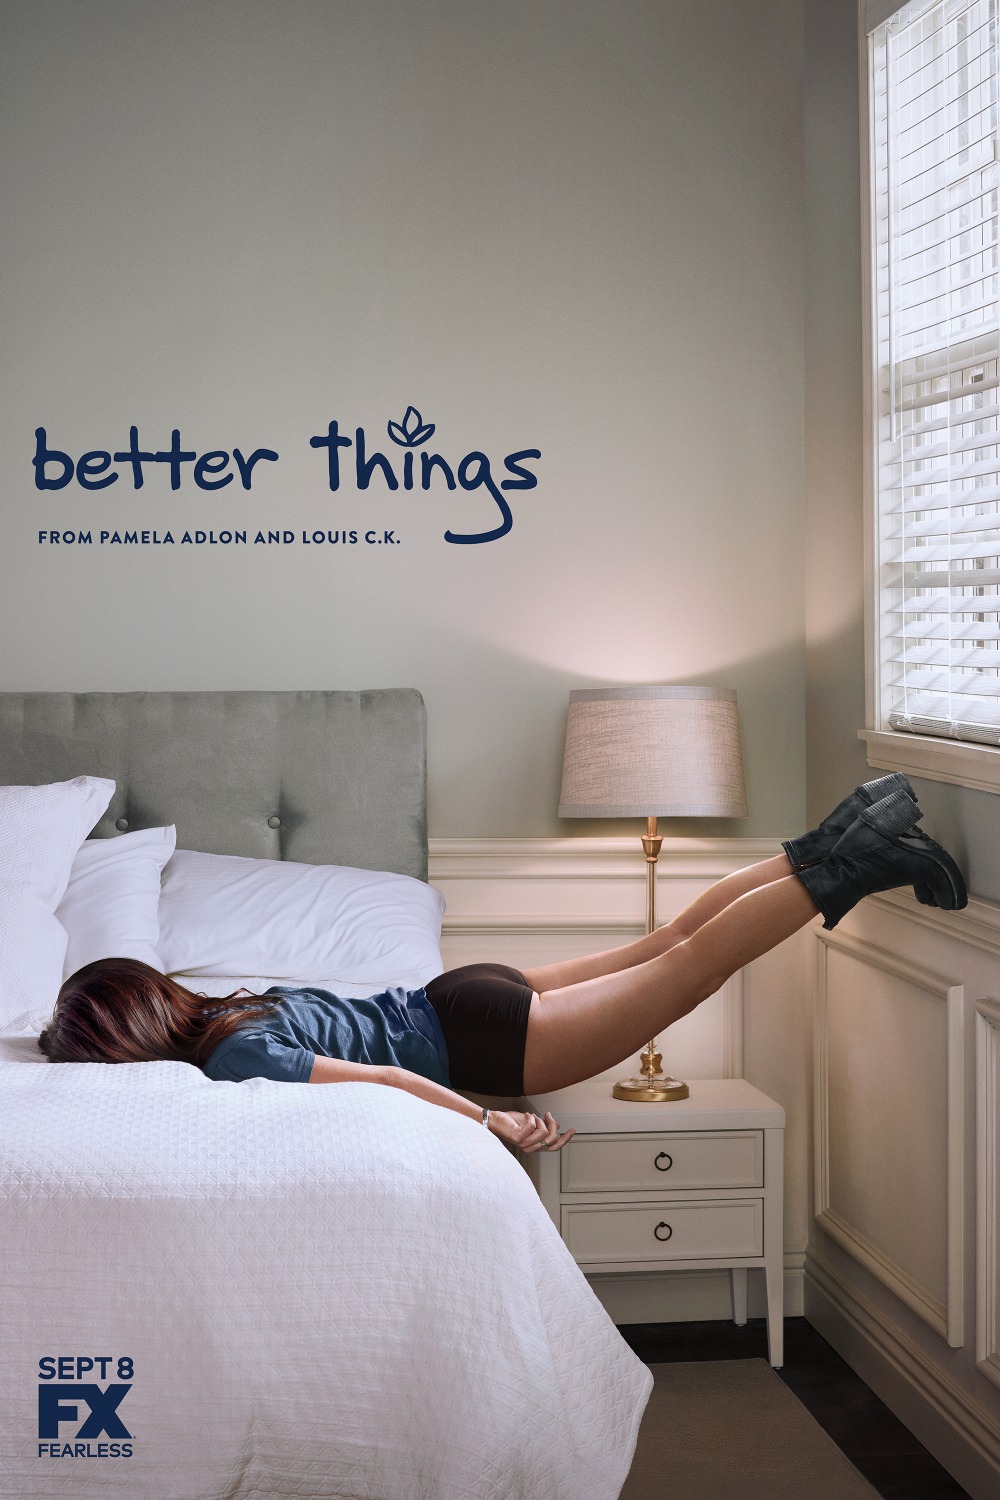 Extra Large TV Poster Image for Better Things (#1 of 11)